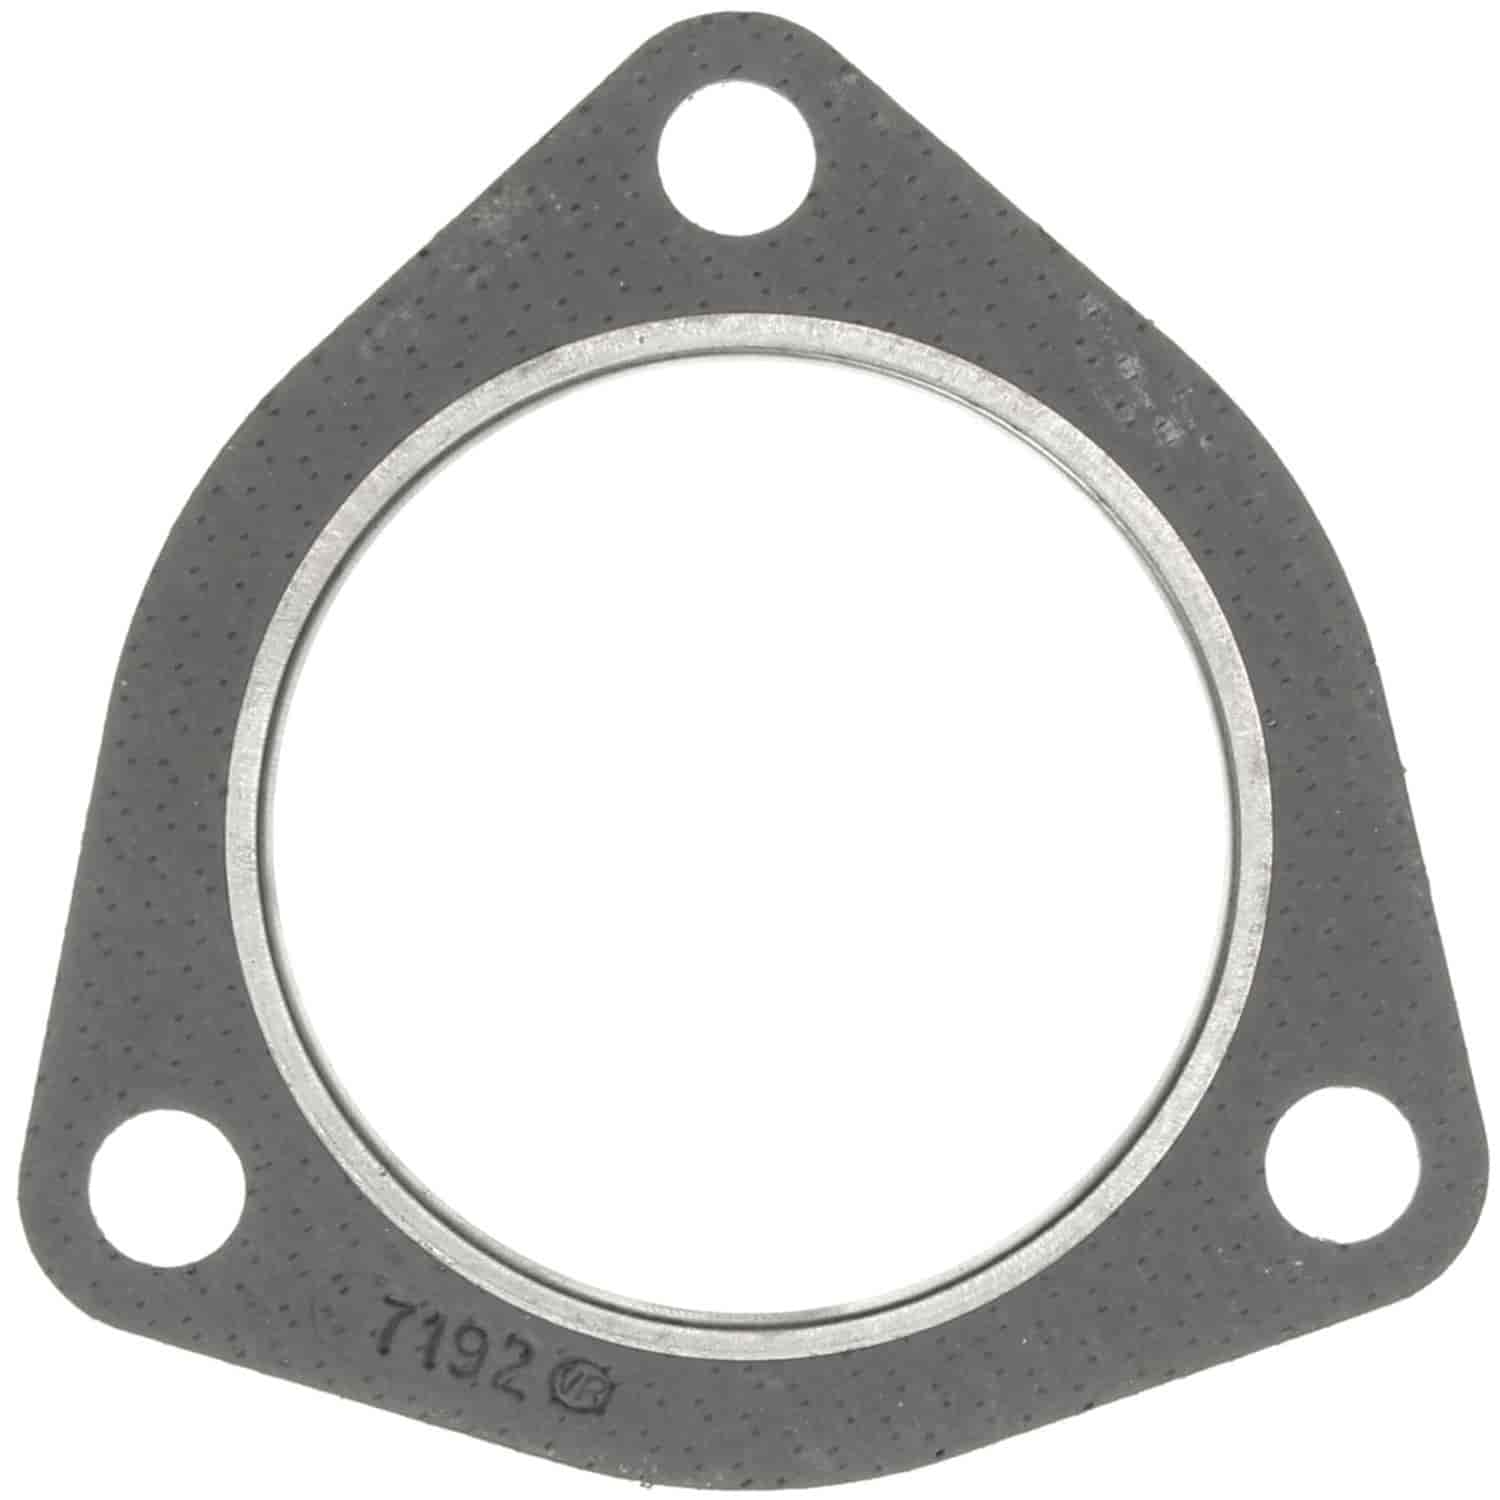 Exhaust Pipe Flange Gasket 1957-1996 Chevy 283/307/327/348/350/396/400/409/427/454ci